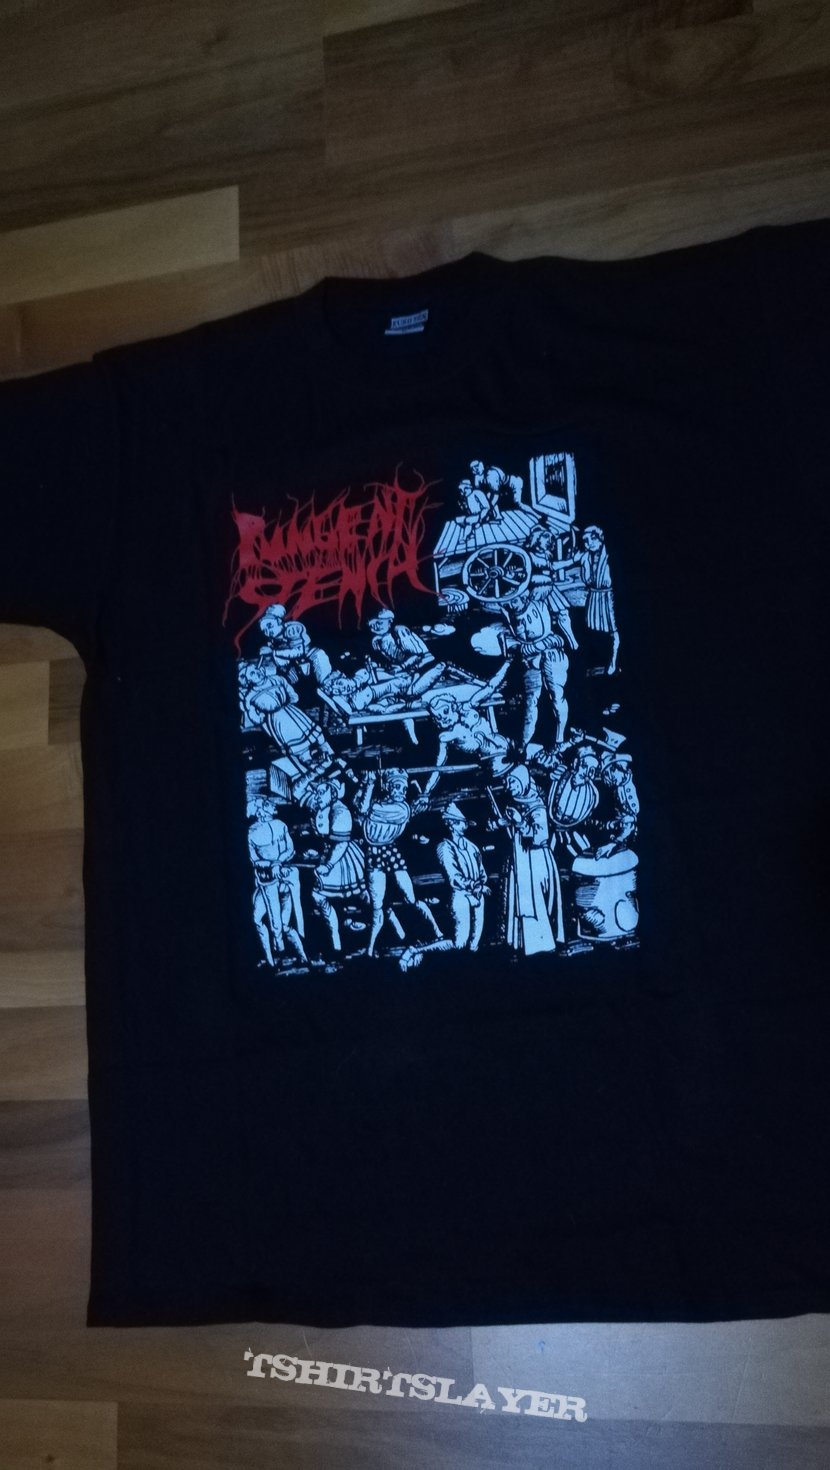 Pungent Stench Holy Inquisition 2003 Tour SHirt